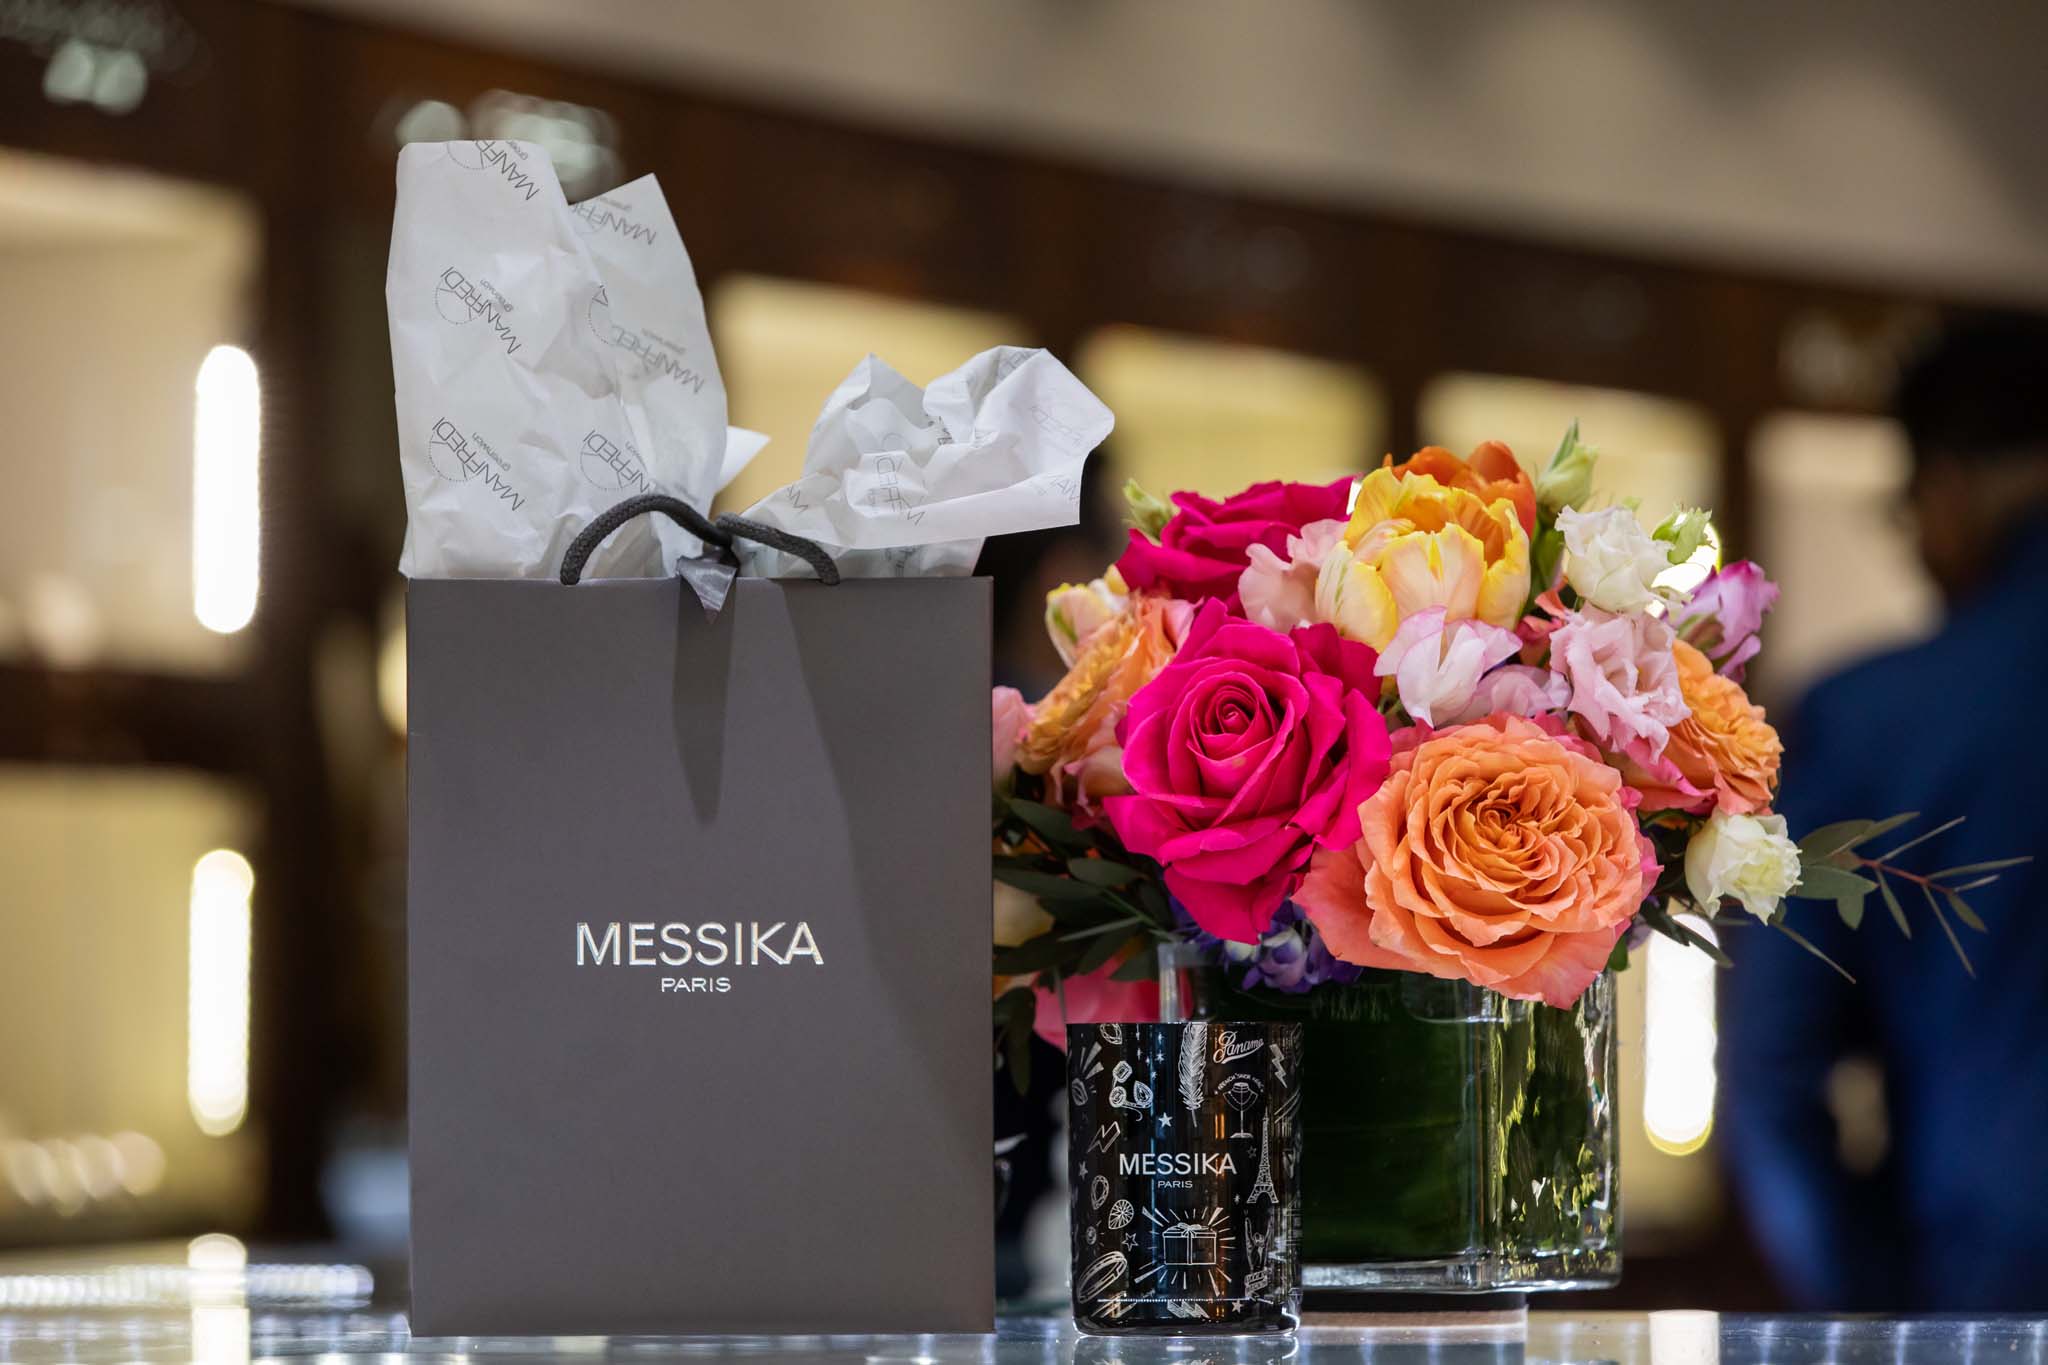 Messika Jewelry Collection - Photos from the Event! (April 29th)